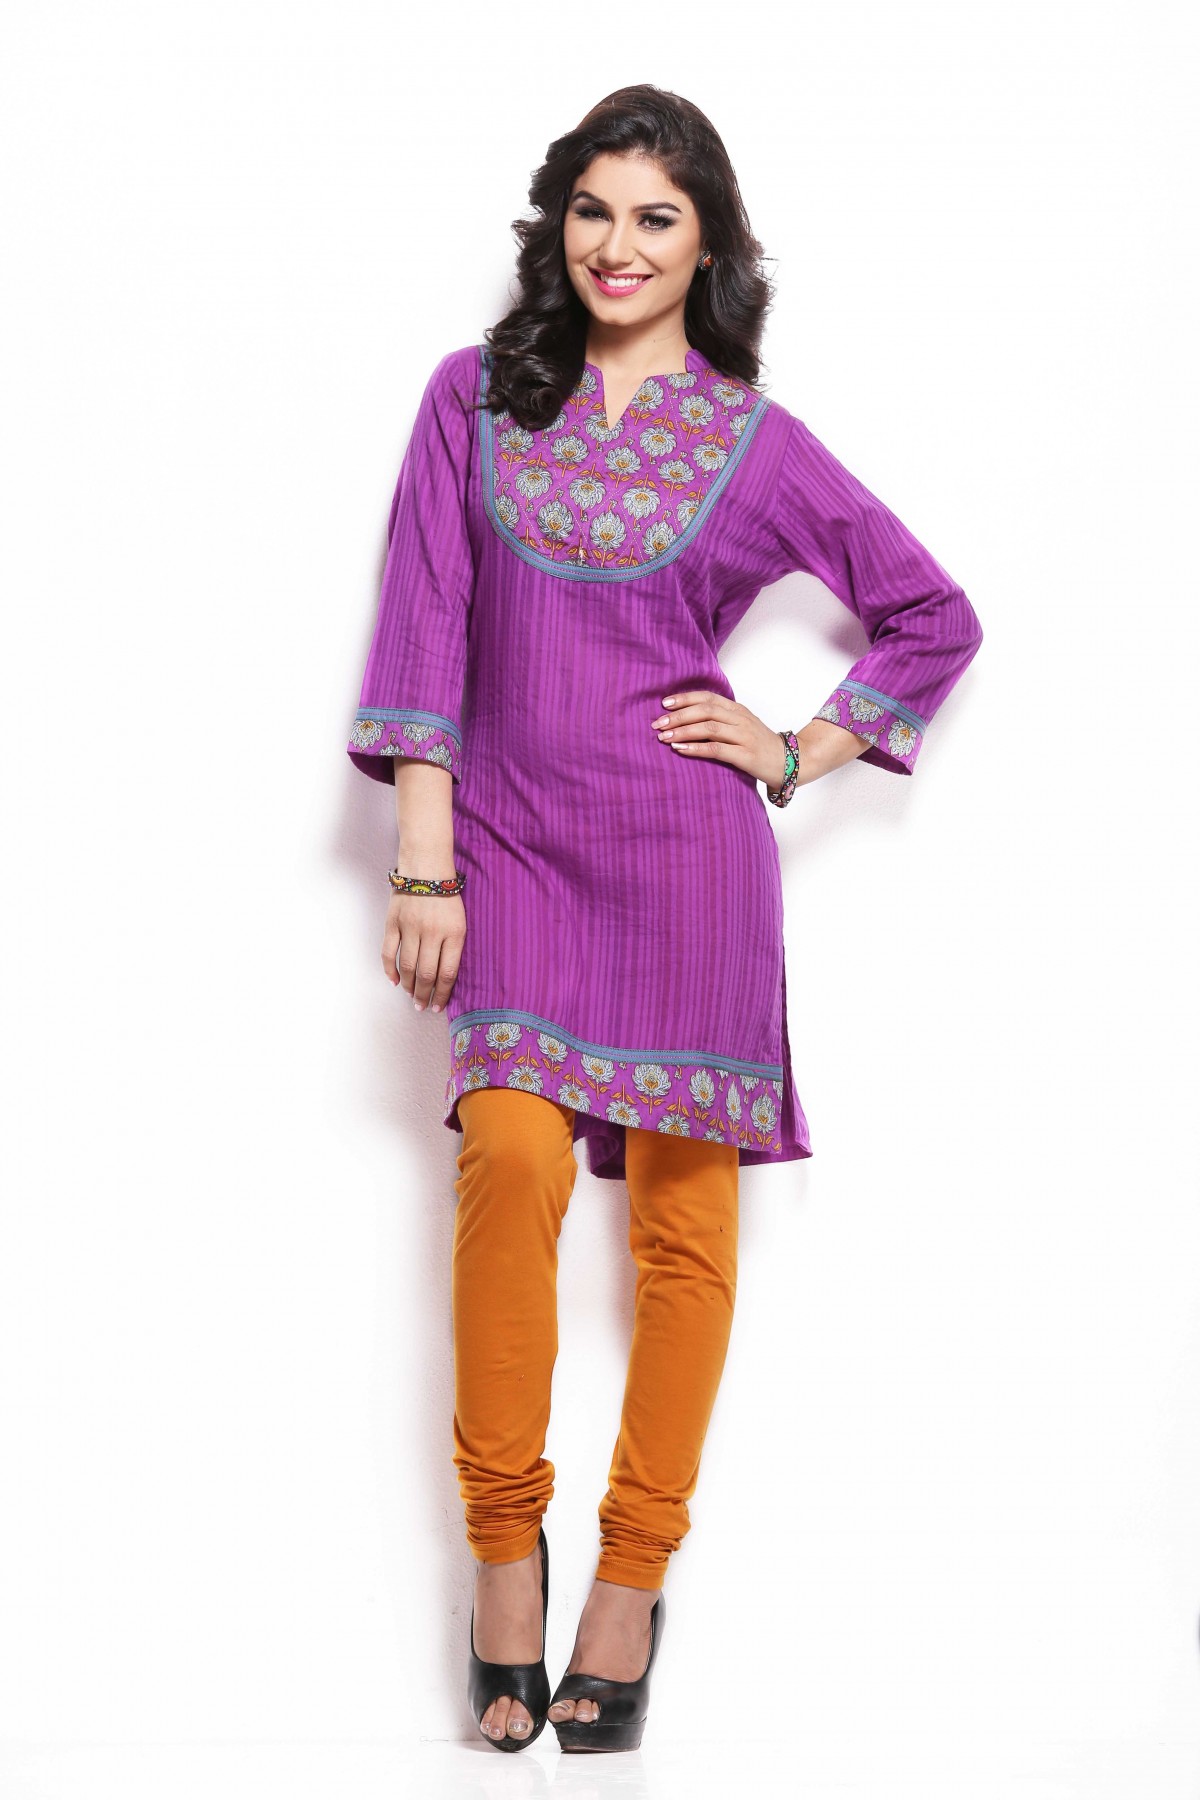 Women Lawn Dresses at Exclusive Marketplace of Clothing